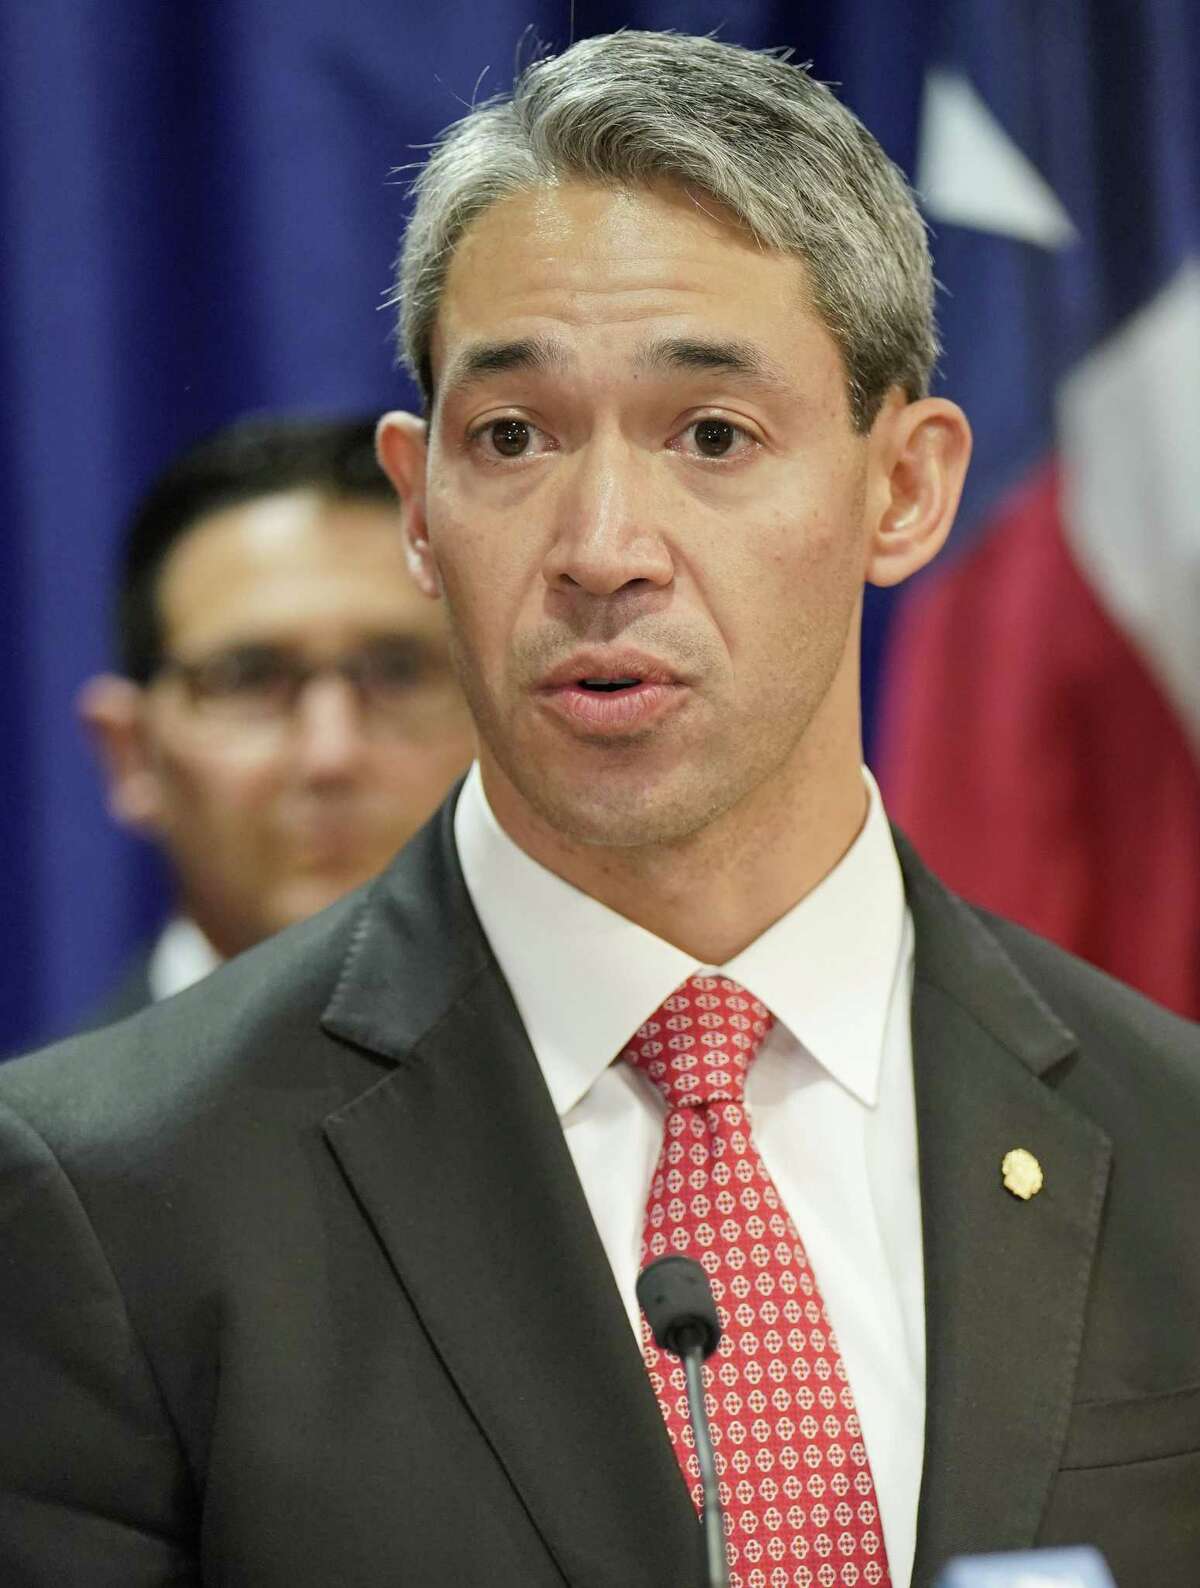 San Antonio Mayor Ron Nirenberg on Friday warned of San Antonio jobs losses if the United States pulls out of the North American Free Trade Agreement.